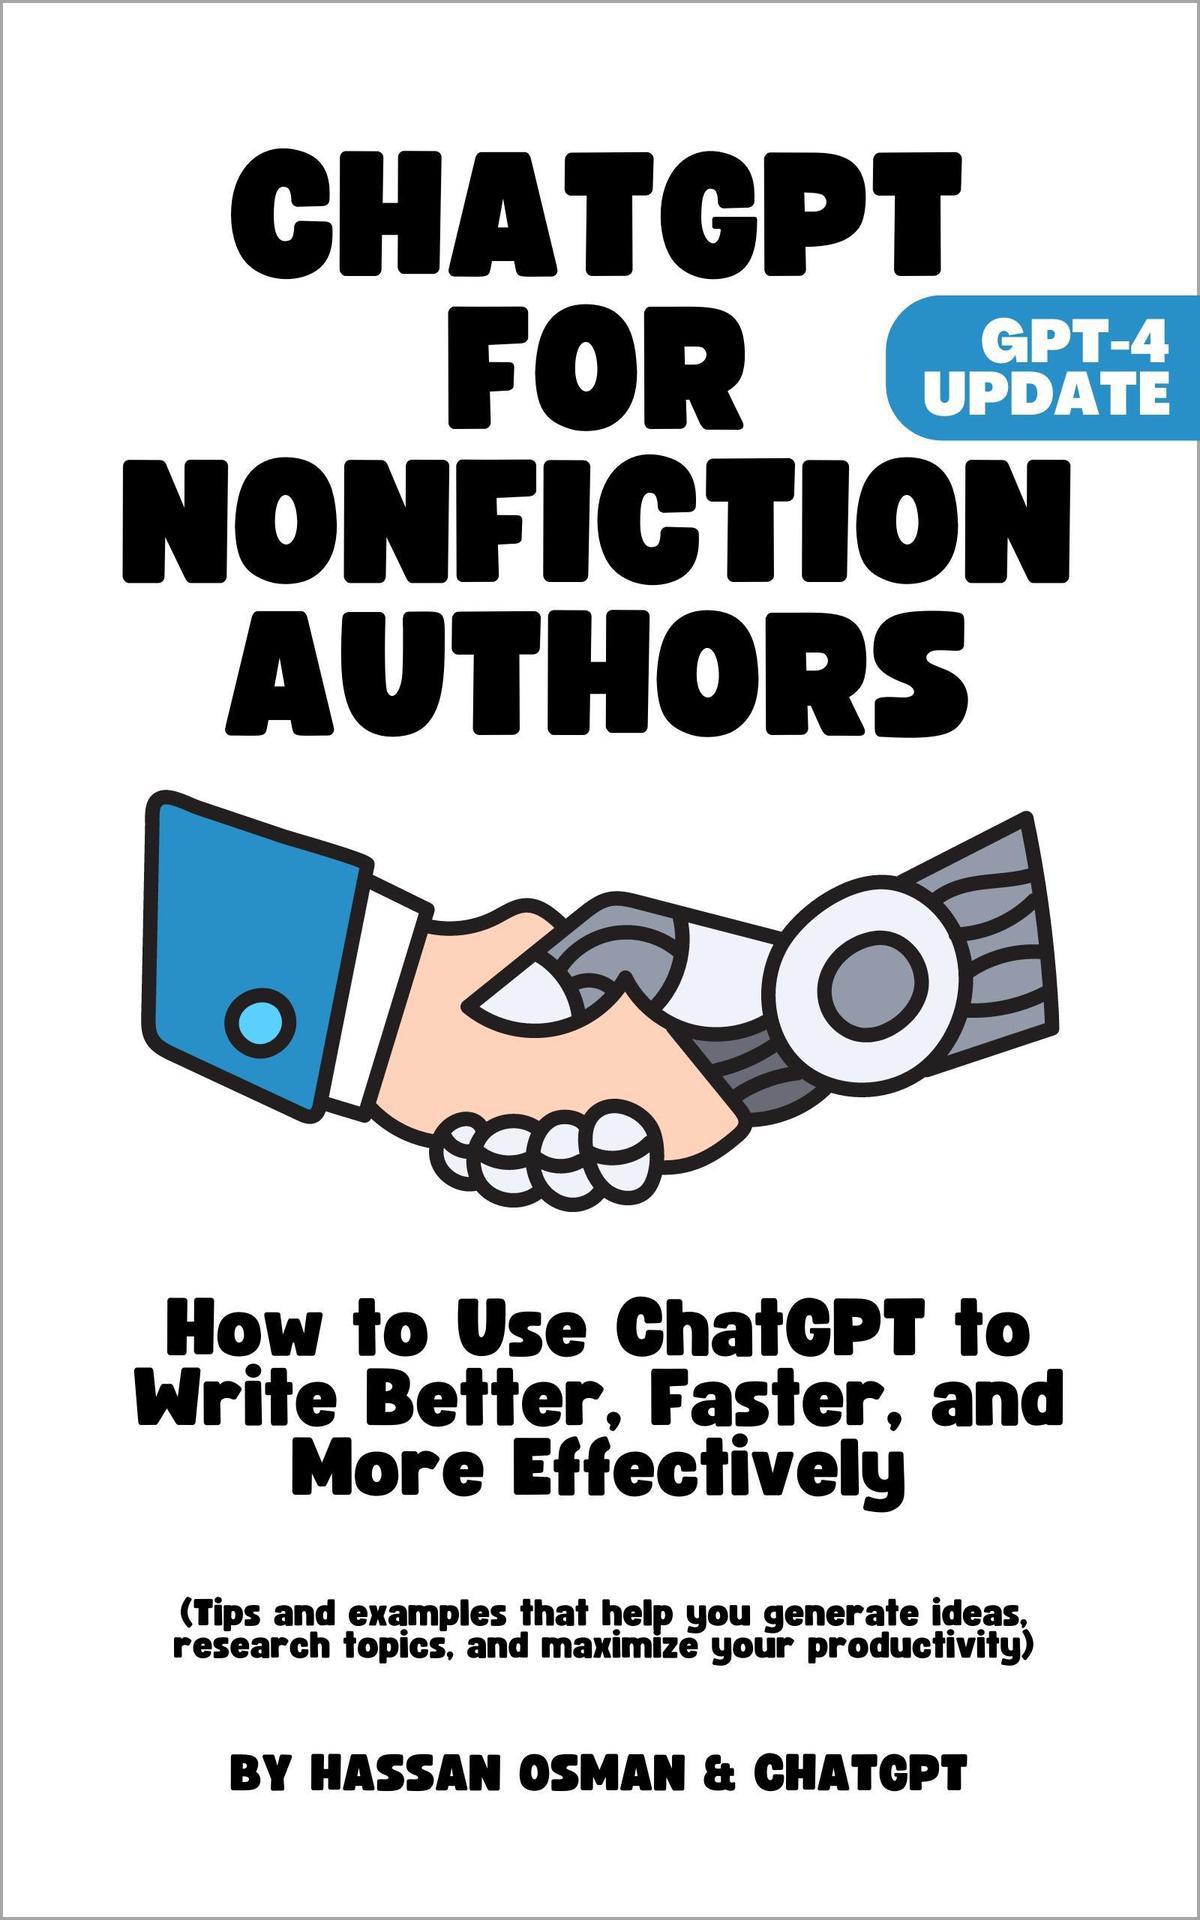 ChatGPT for Nonfiction Authors Book Cover